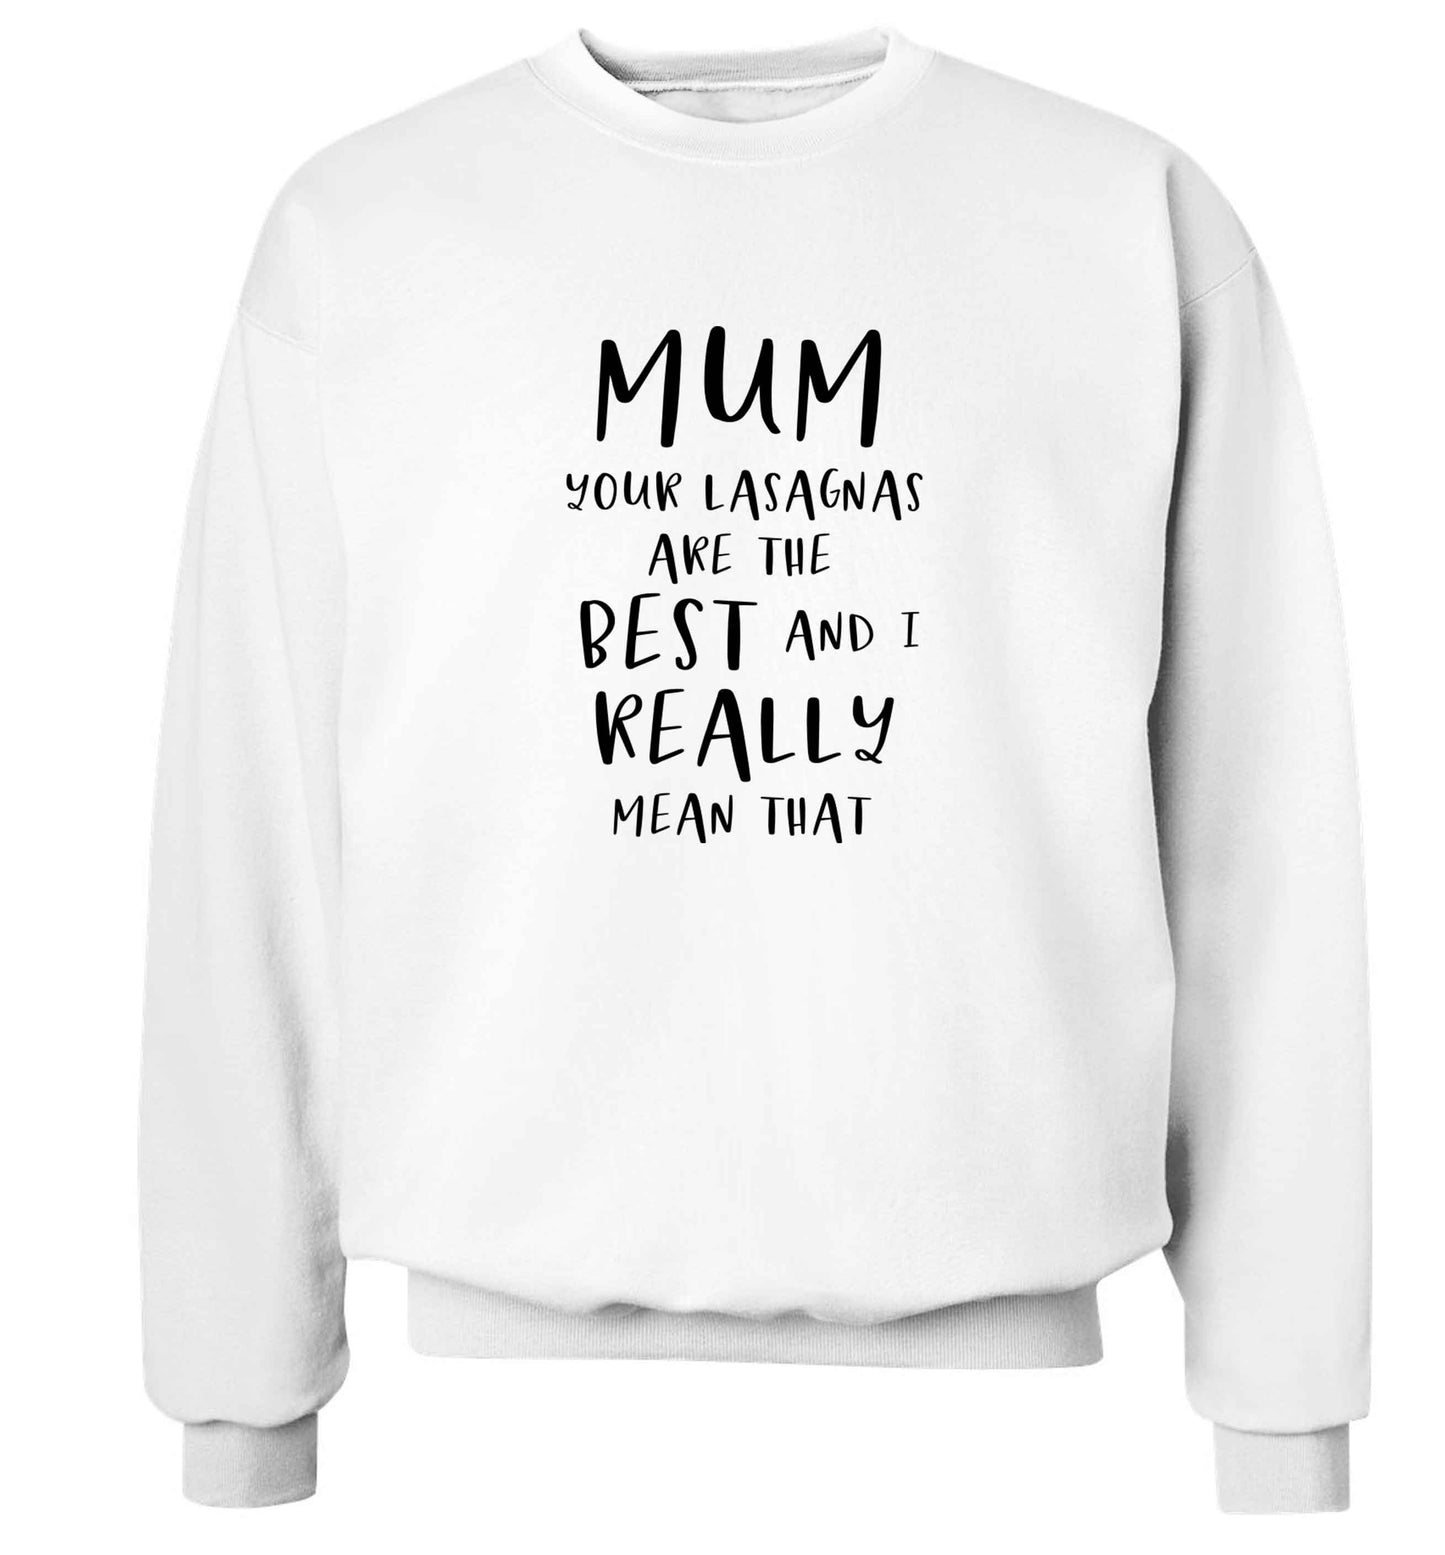 Funny gifts for your mum on mother's dayor her birthday! Mum your lasagnas are the best and I really mean that adult's unisex white sweater 2XL